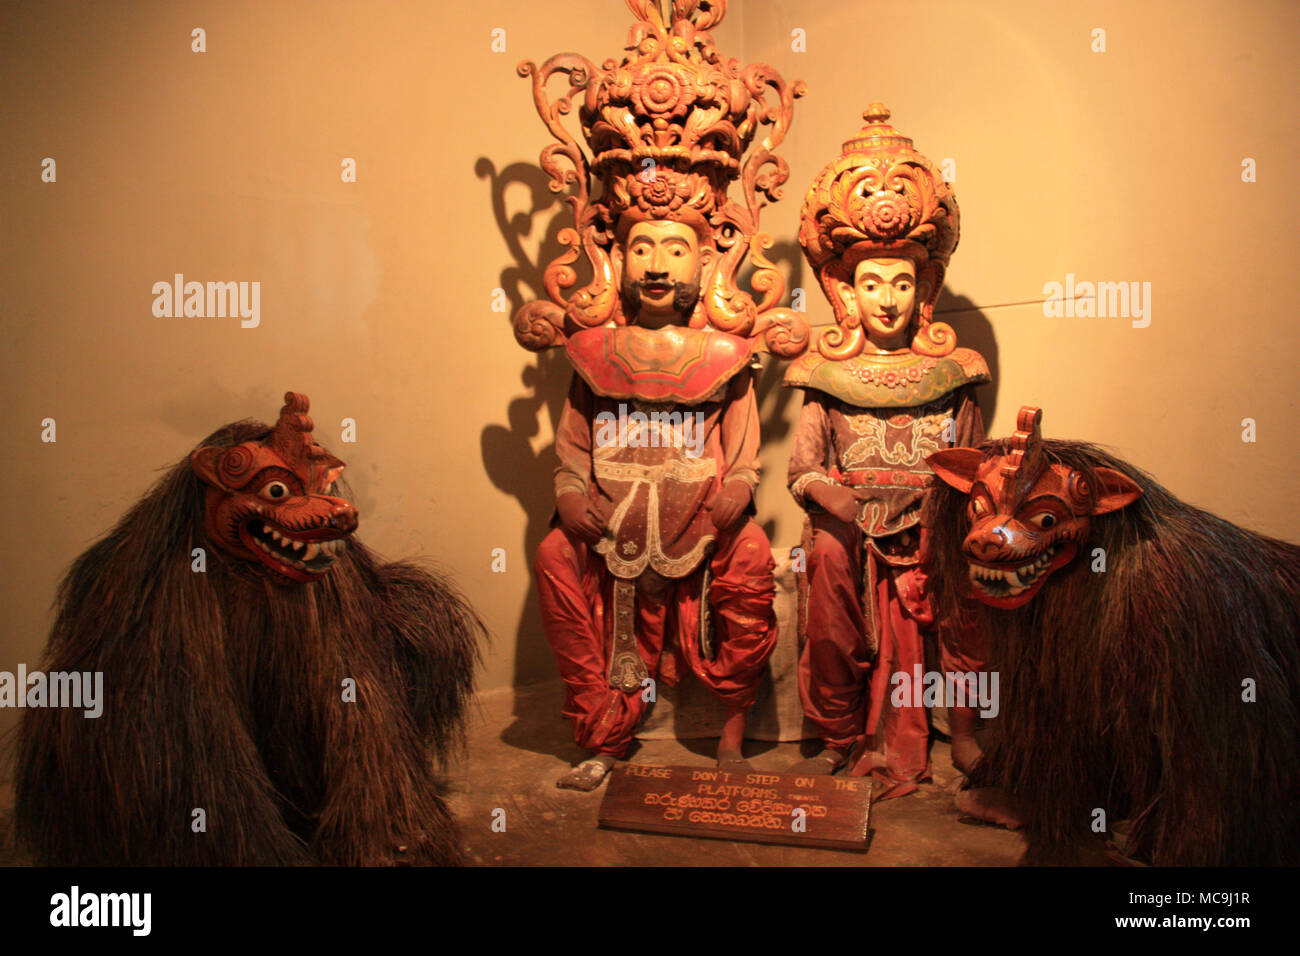 Wooden masks and puppets in the Ambalangoda Mask Museum in Sri Lanka Stock Photo